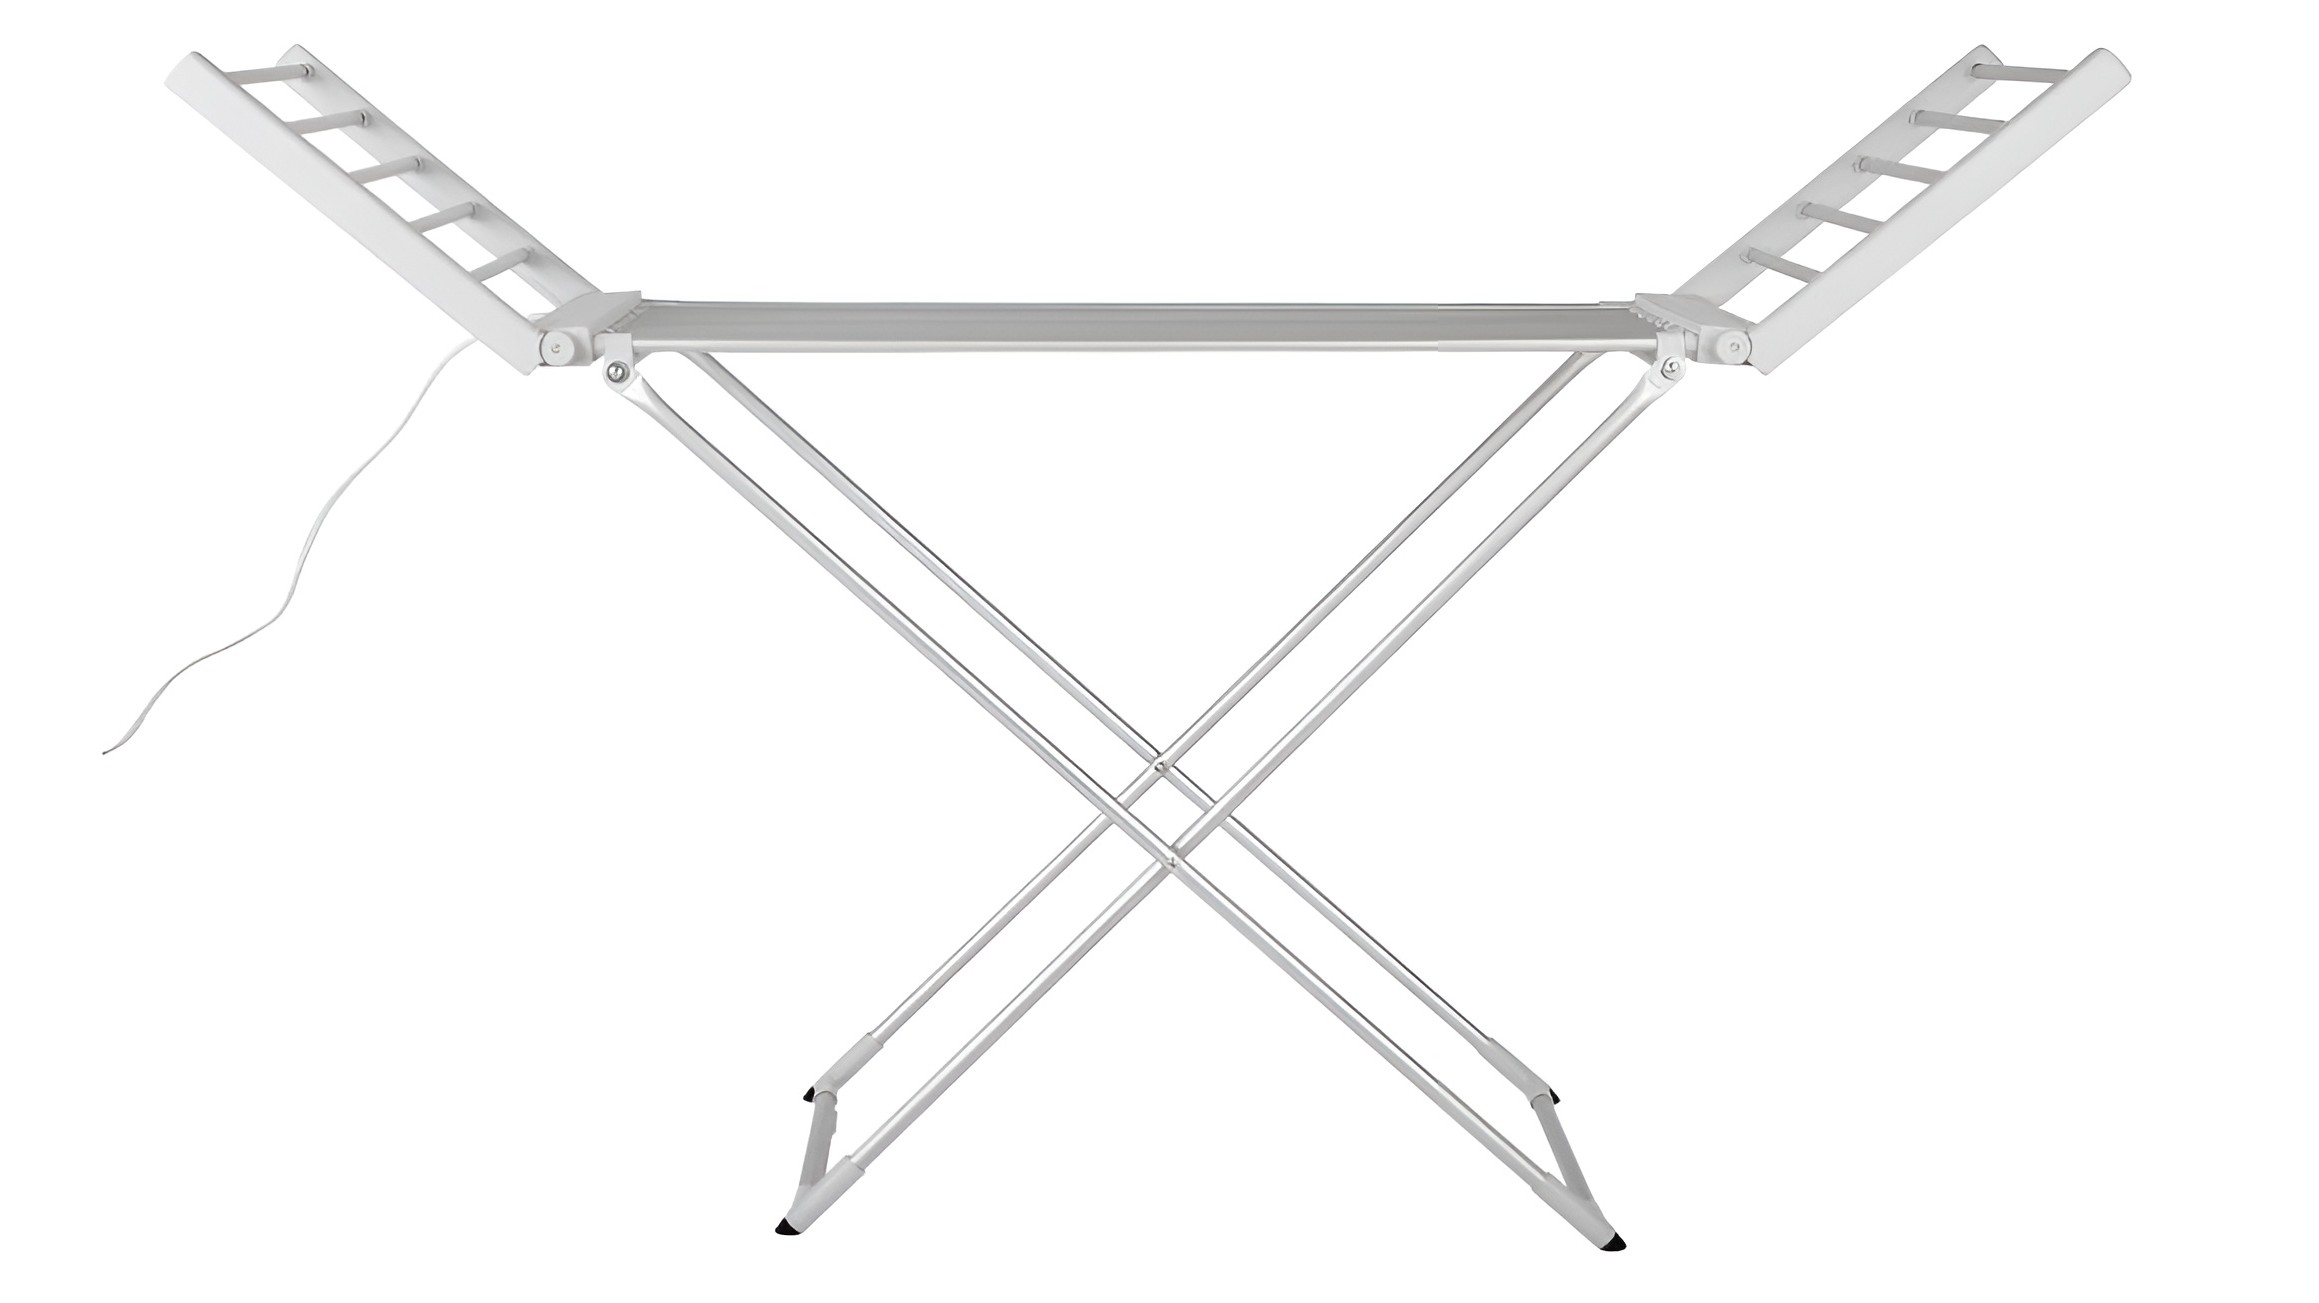 Heated Clothes Airer 1. Freestanding Heated Drying Racks